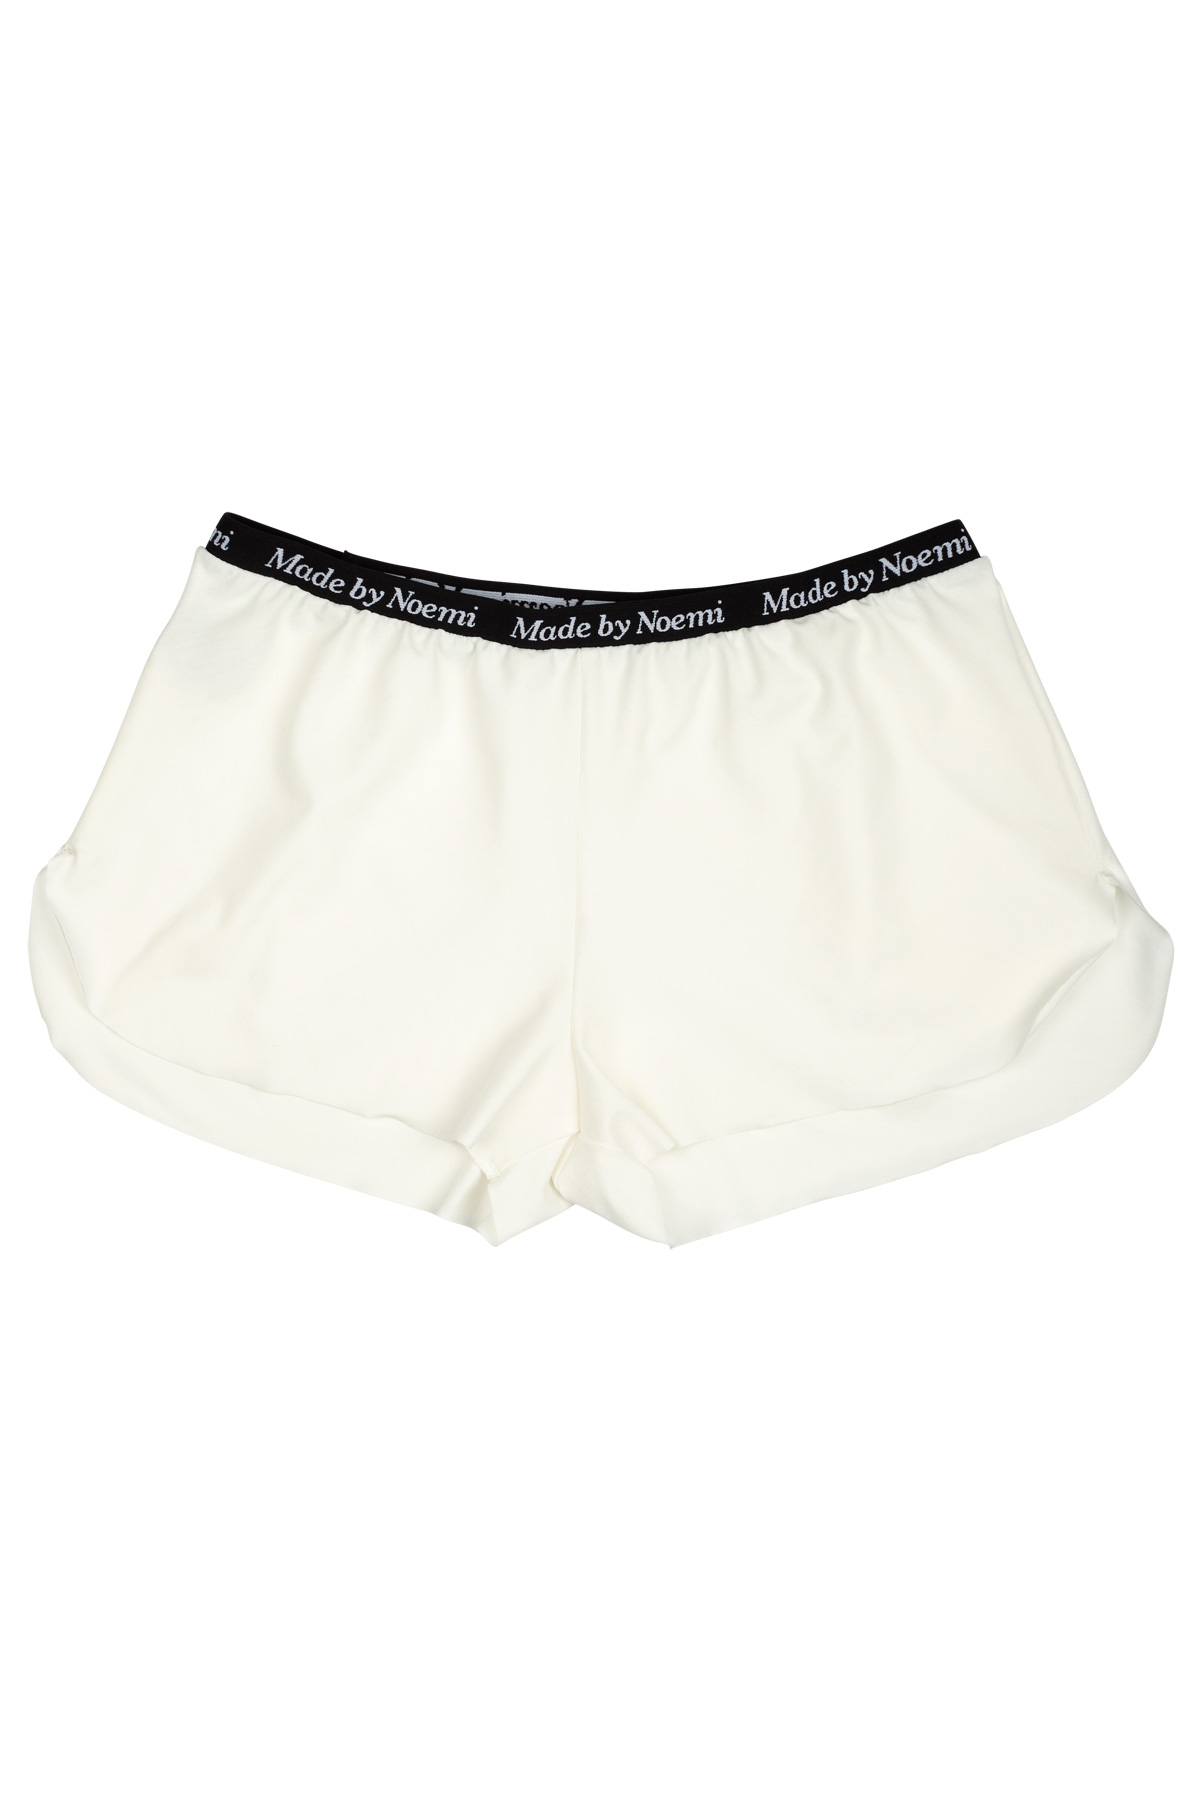 Off-white Cotton boxer shorts – Made by Noemi